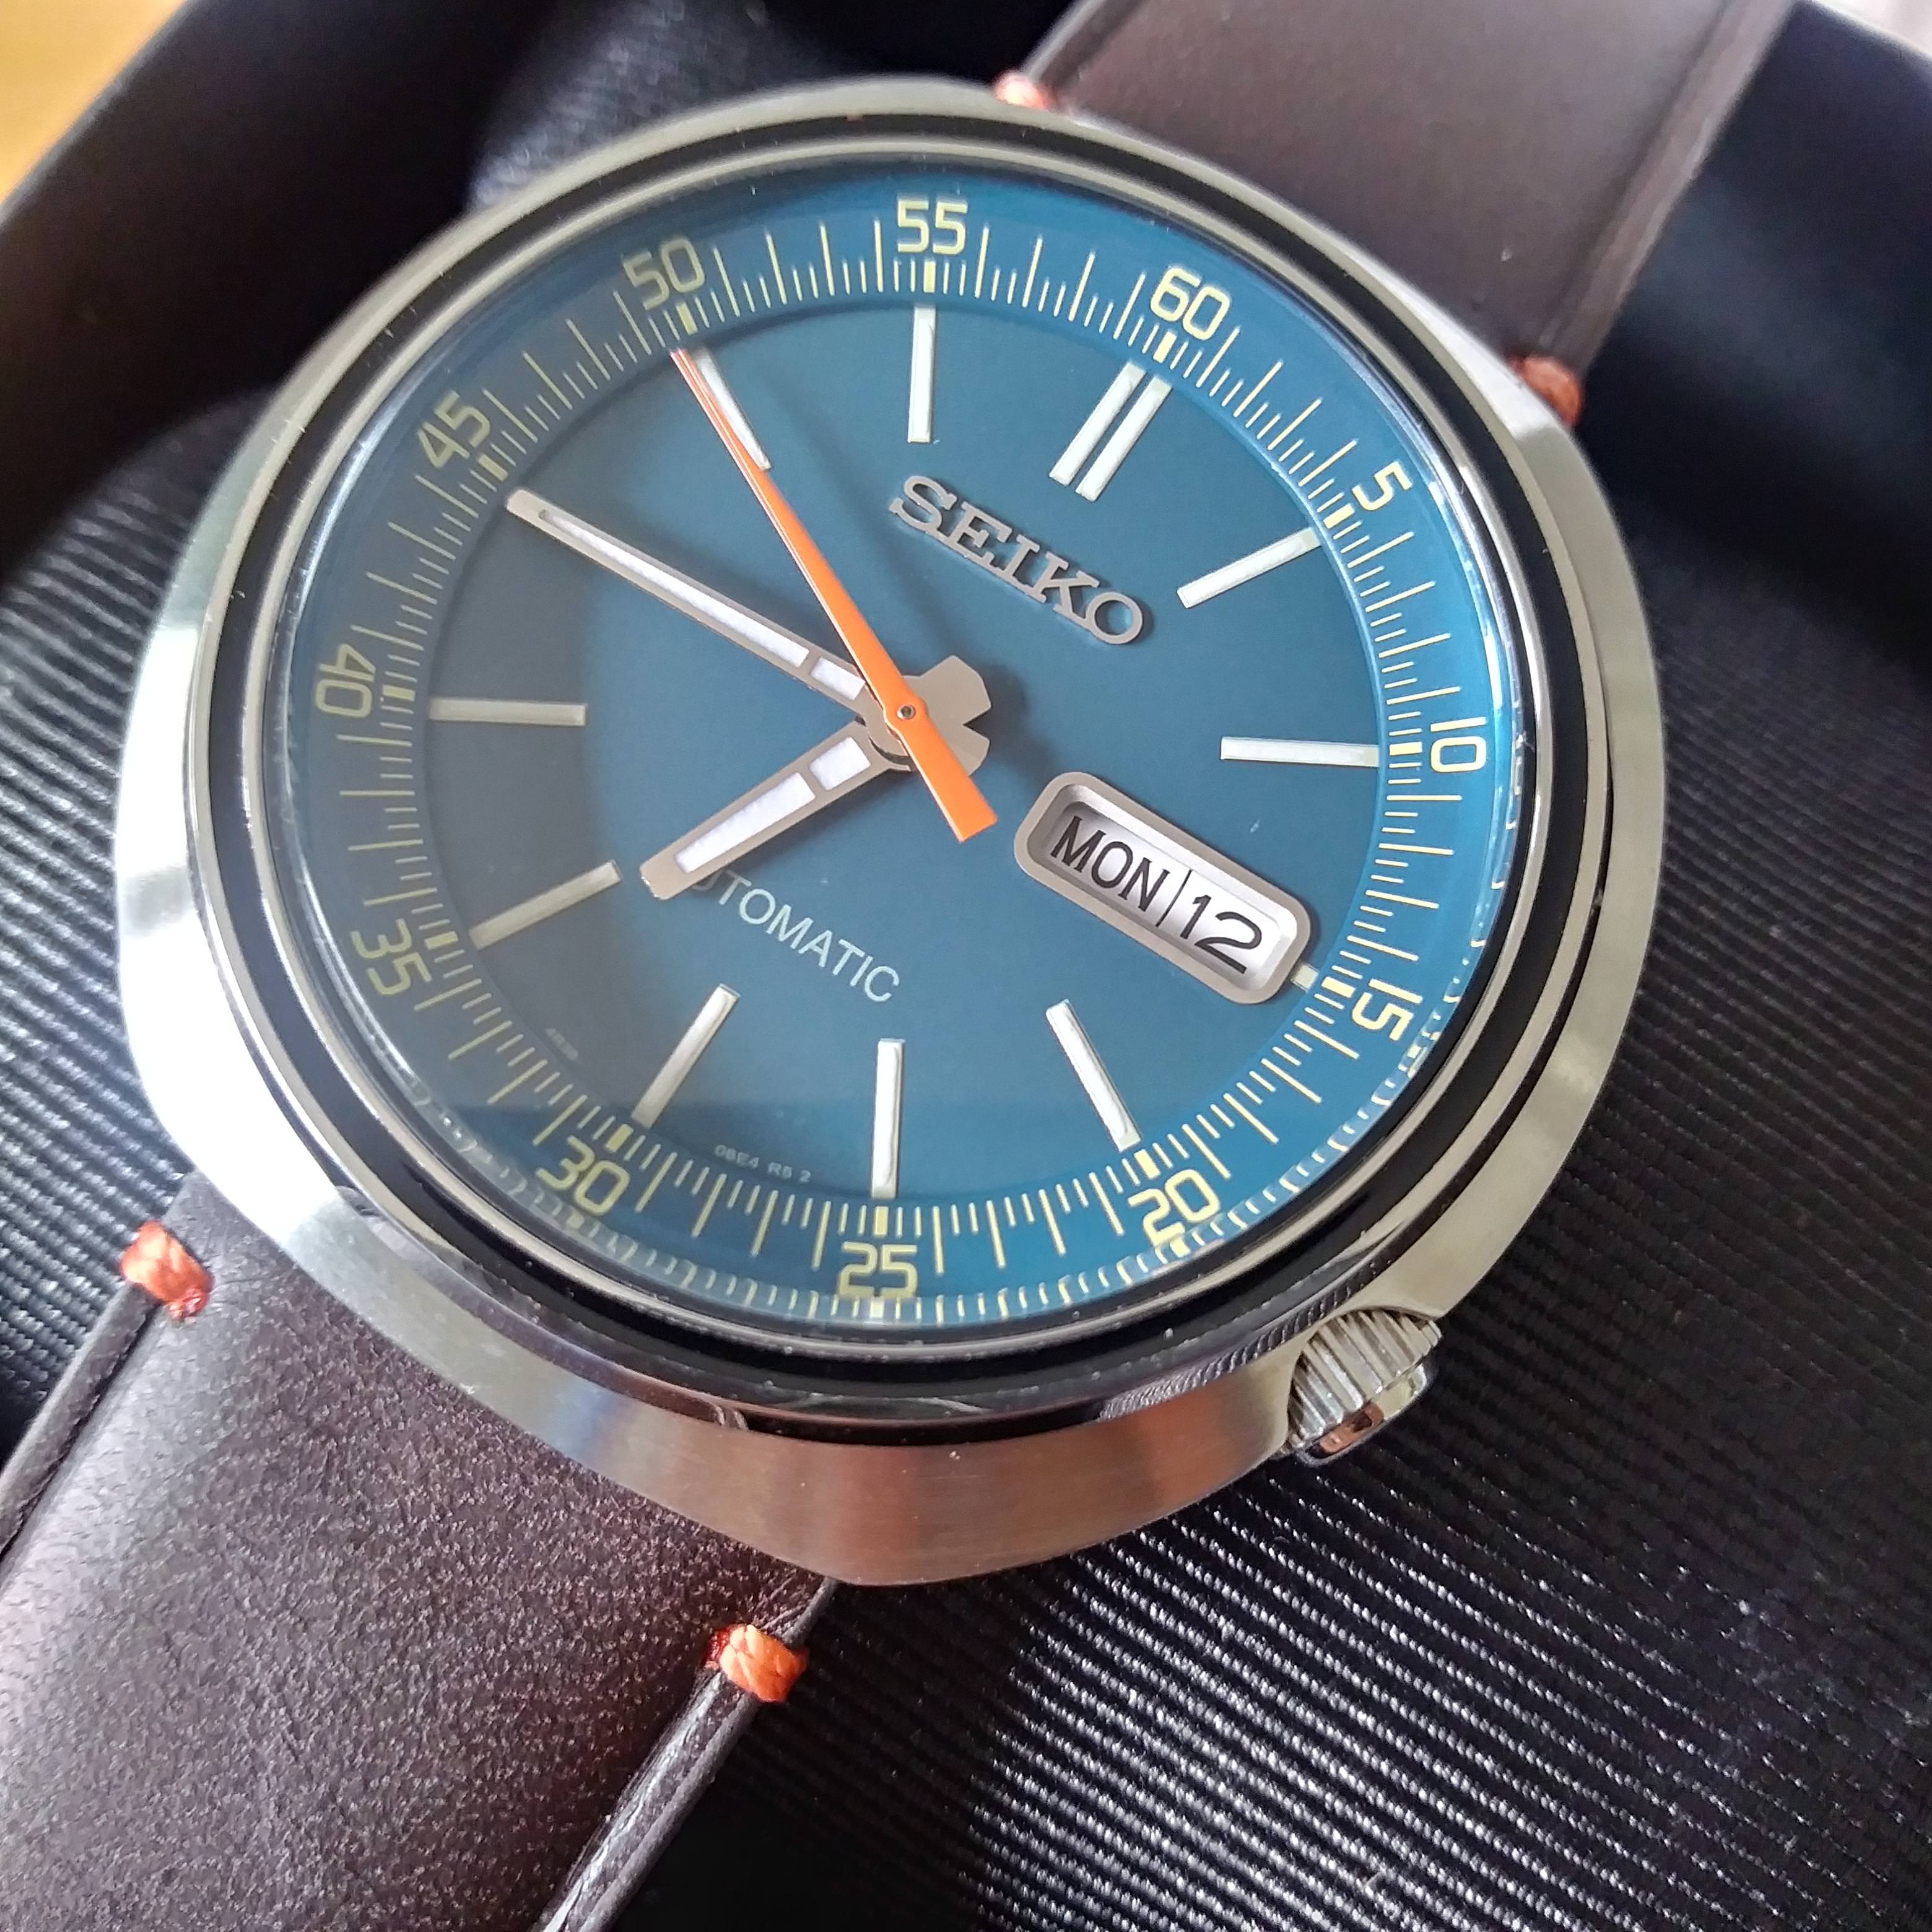 SOLD: New Seiko SRPC13 Limited - Full WatchCharts